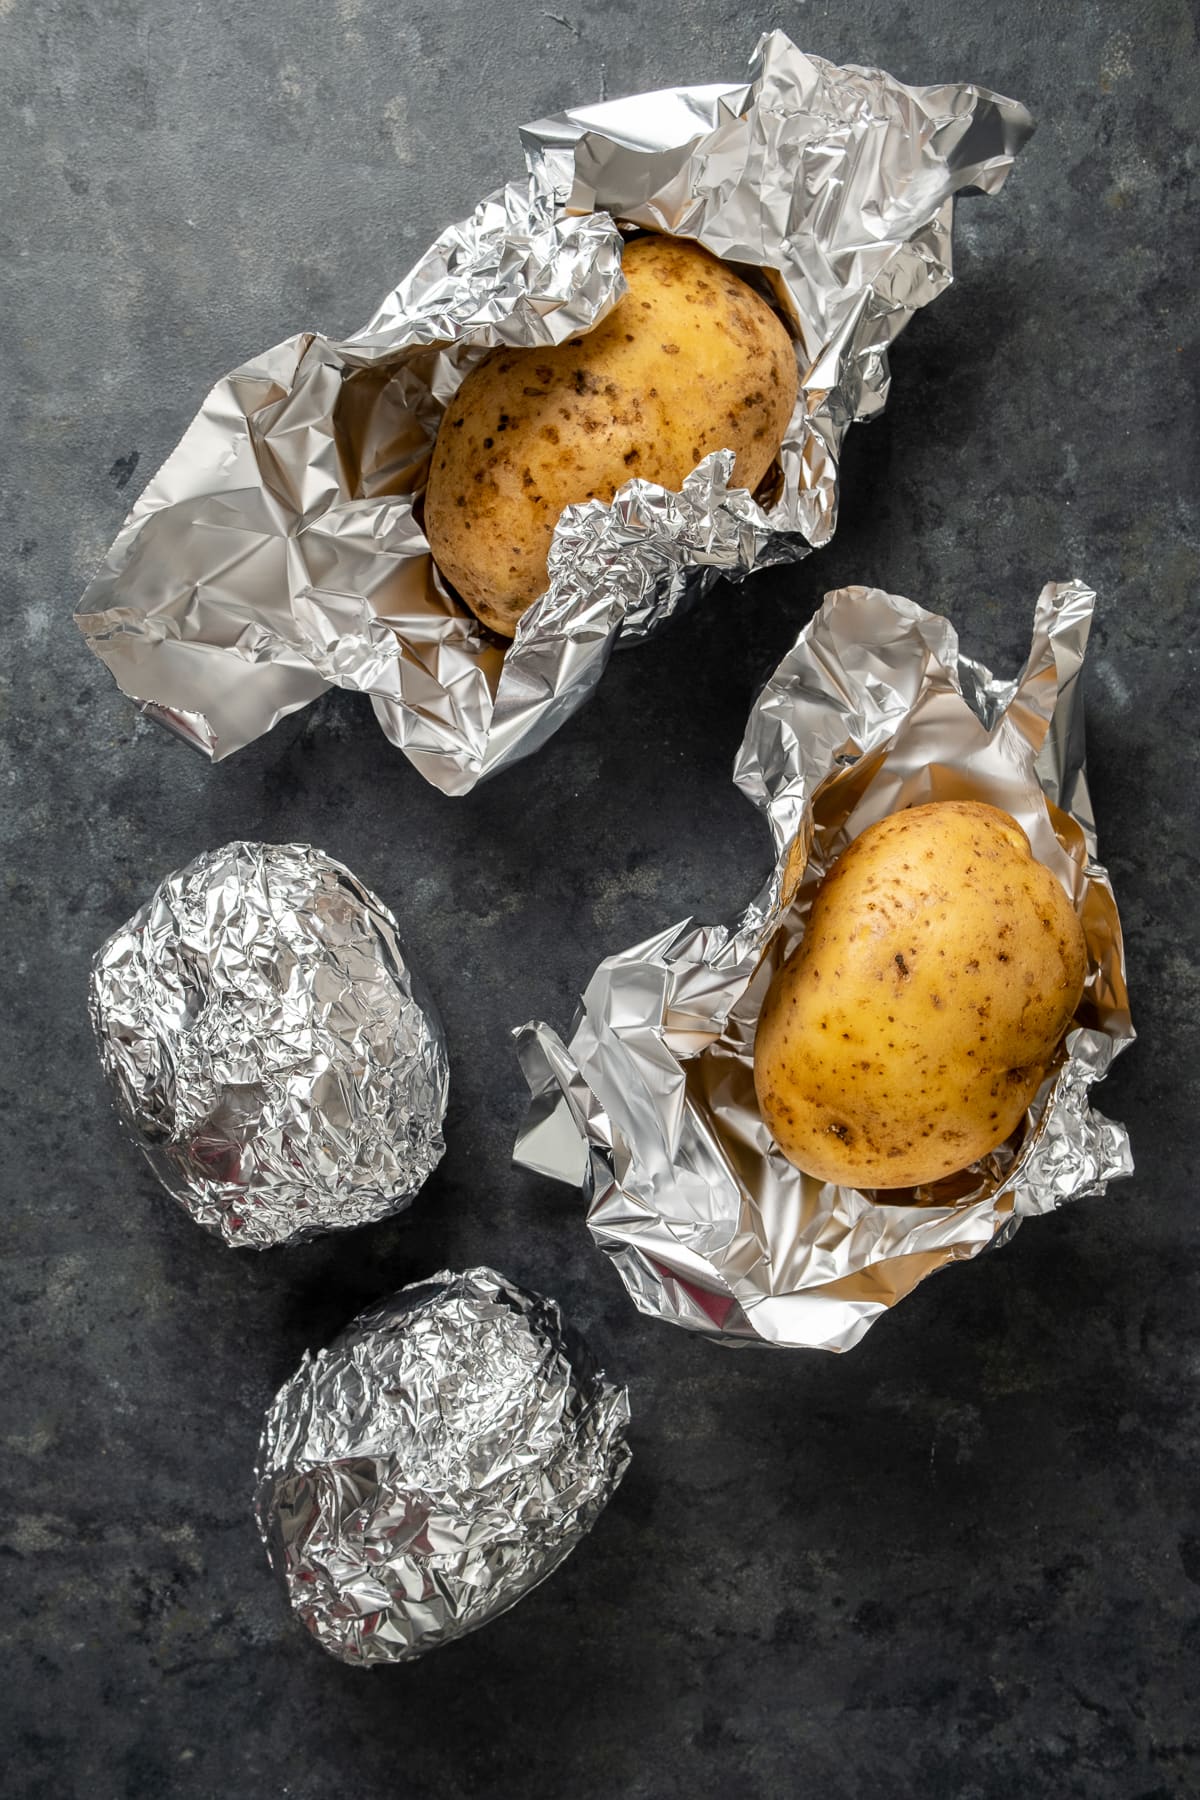 Two potatoes wrapped in foil, two potatoes are half wrapped with foil on a dark background.